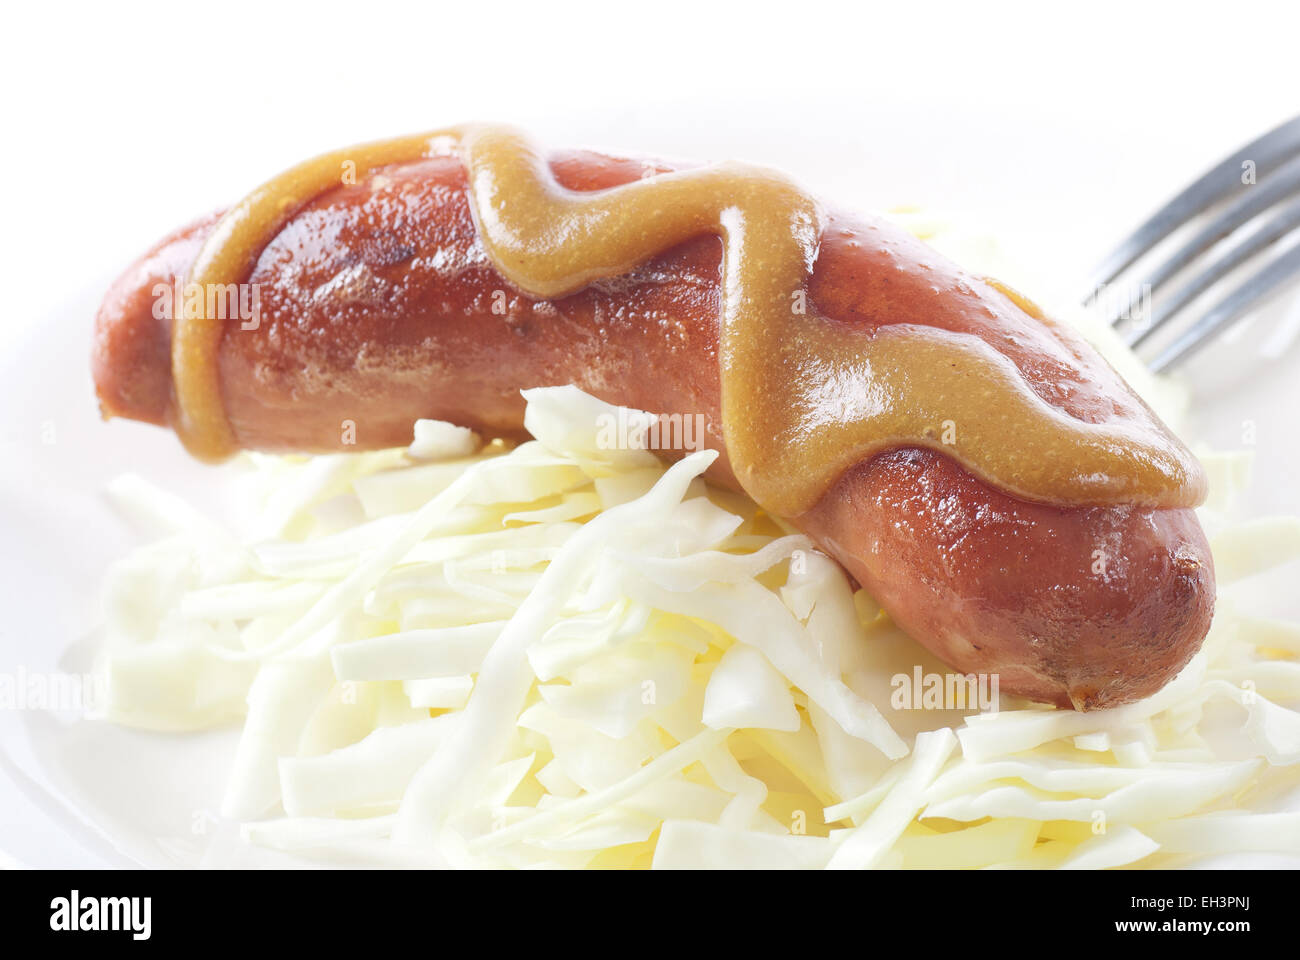 Grilled bratwurst with strong mustard on cabbage. Stock Photo